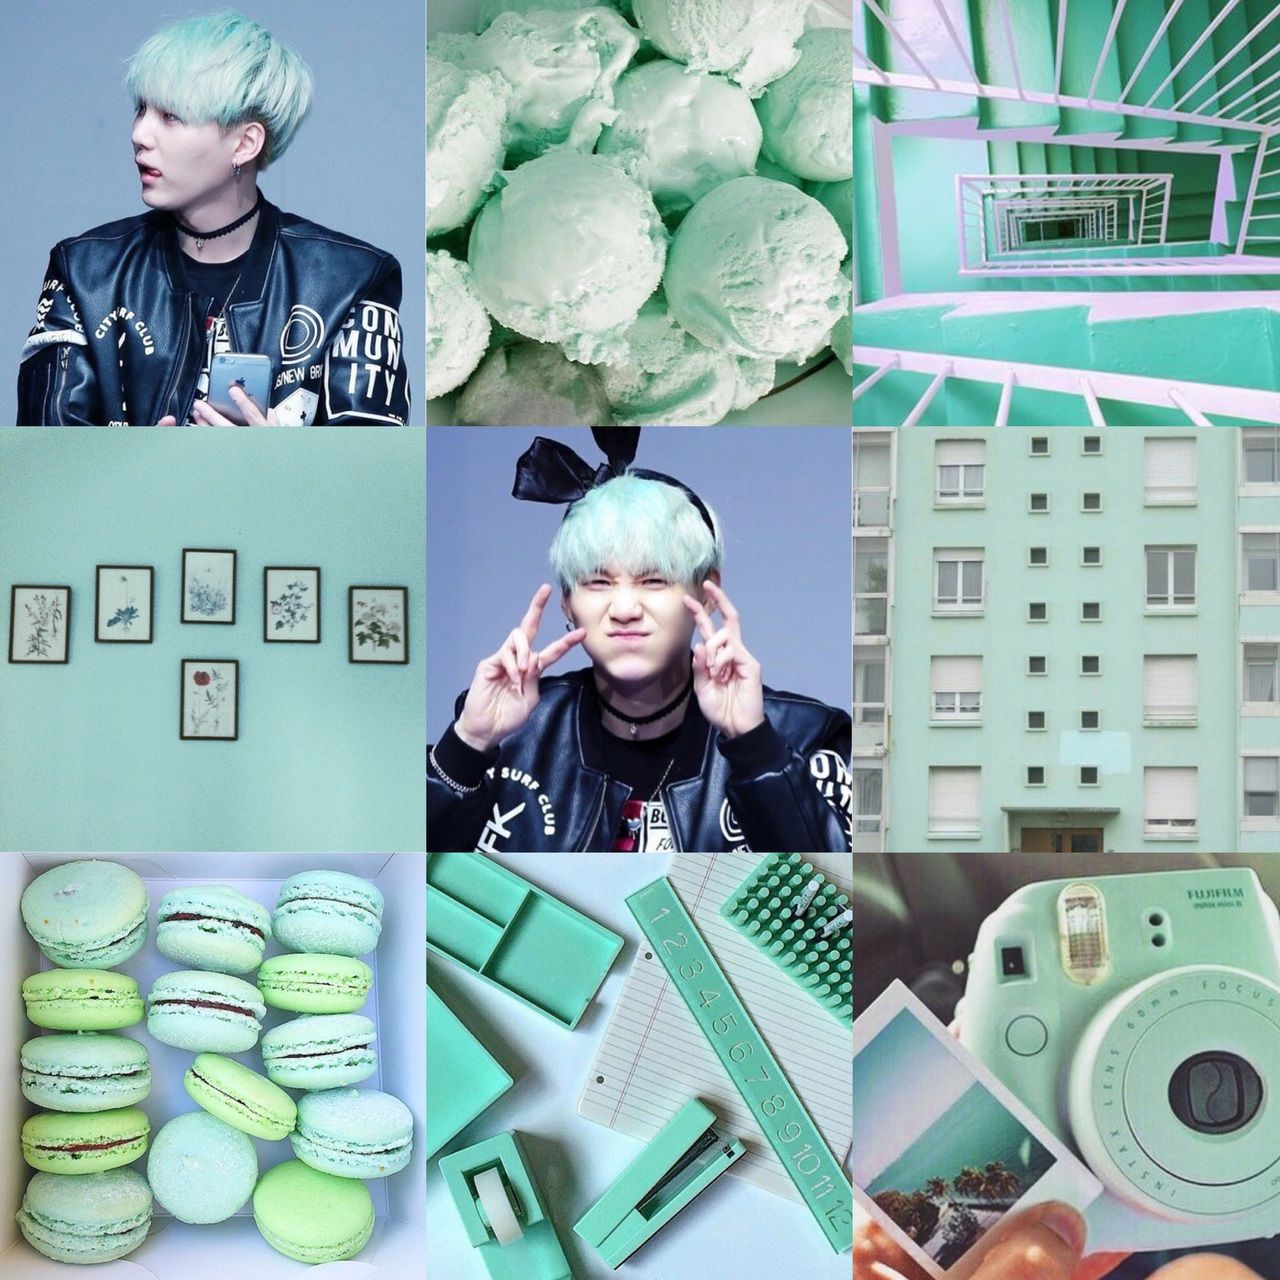 A collage of Jimin from BTS with a green aesthetic - Mint green